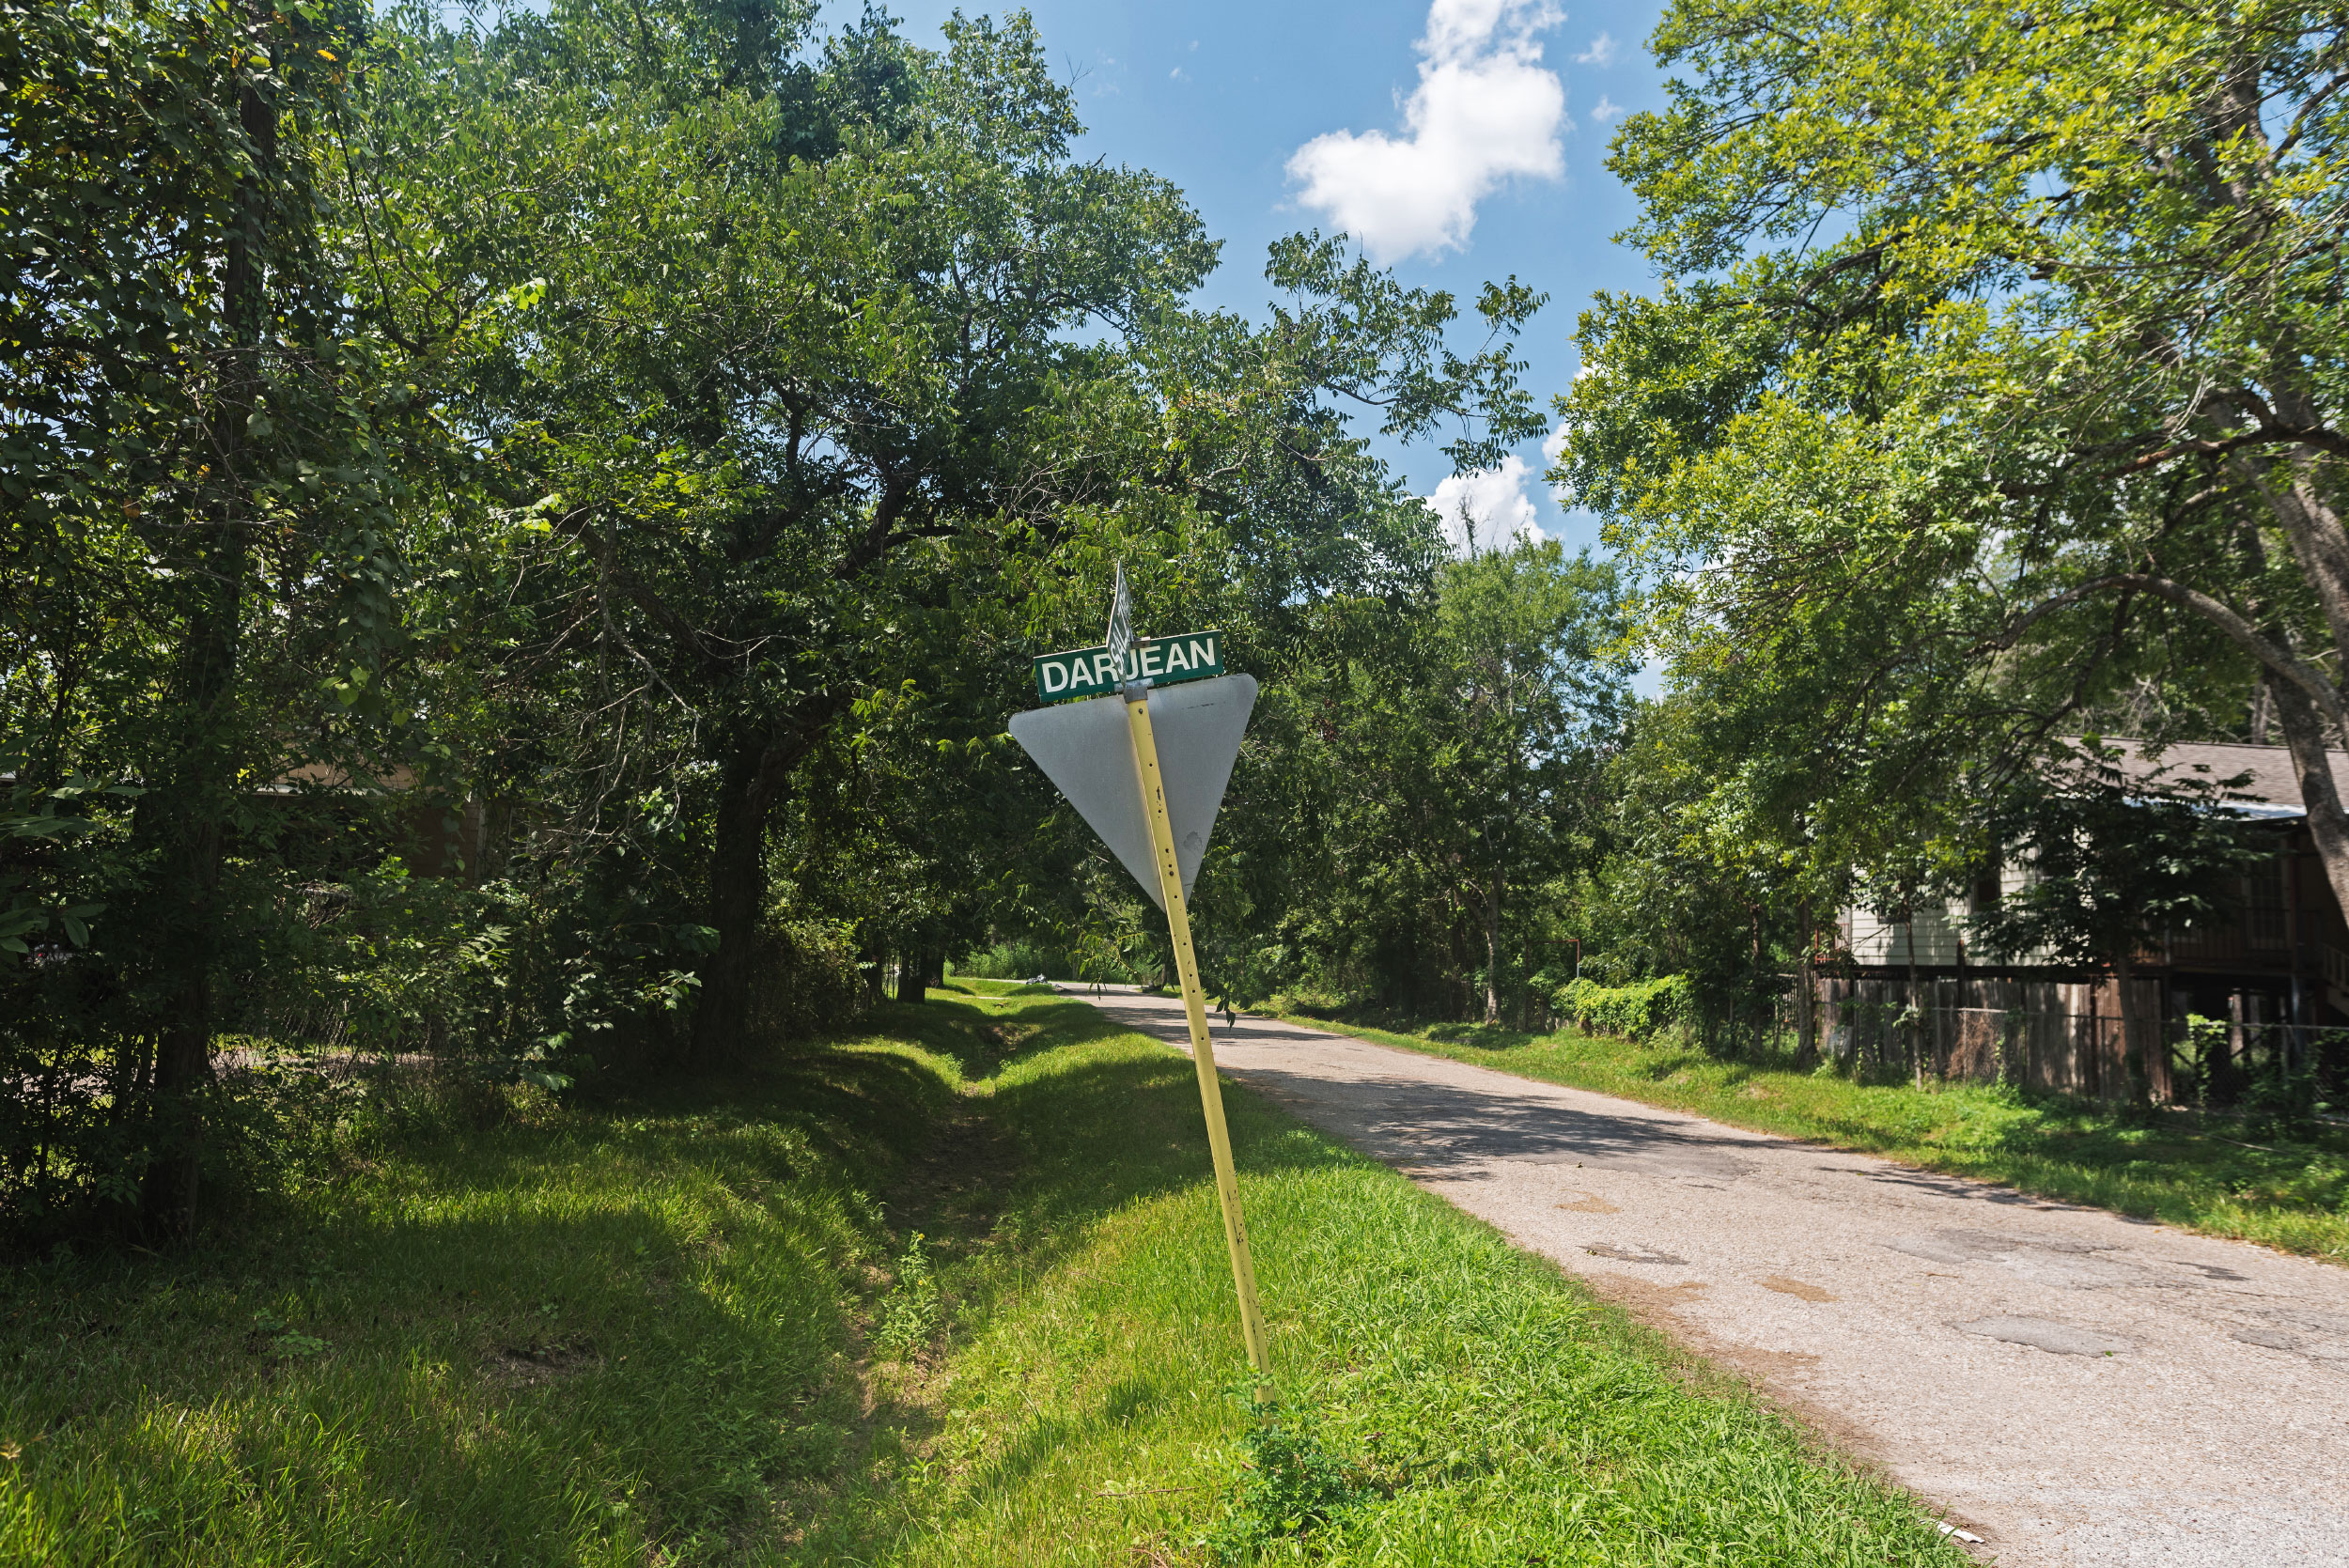 A sign post with the street name Darjean leans toward a grassy ditch